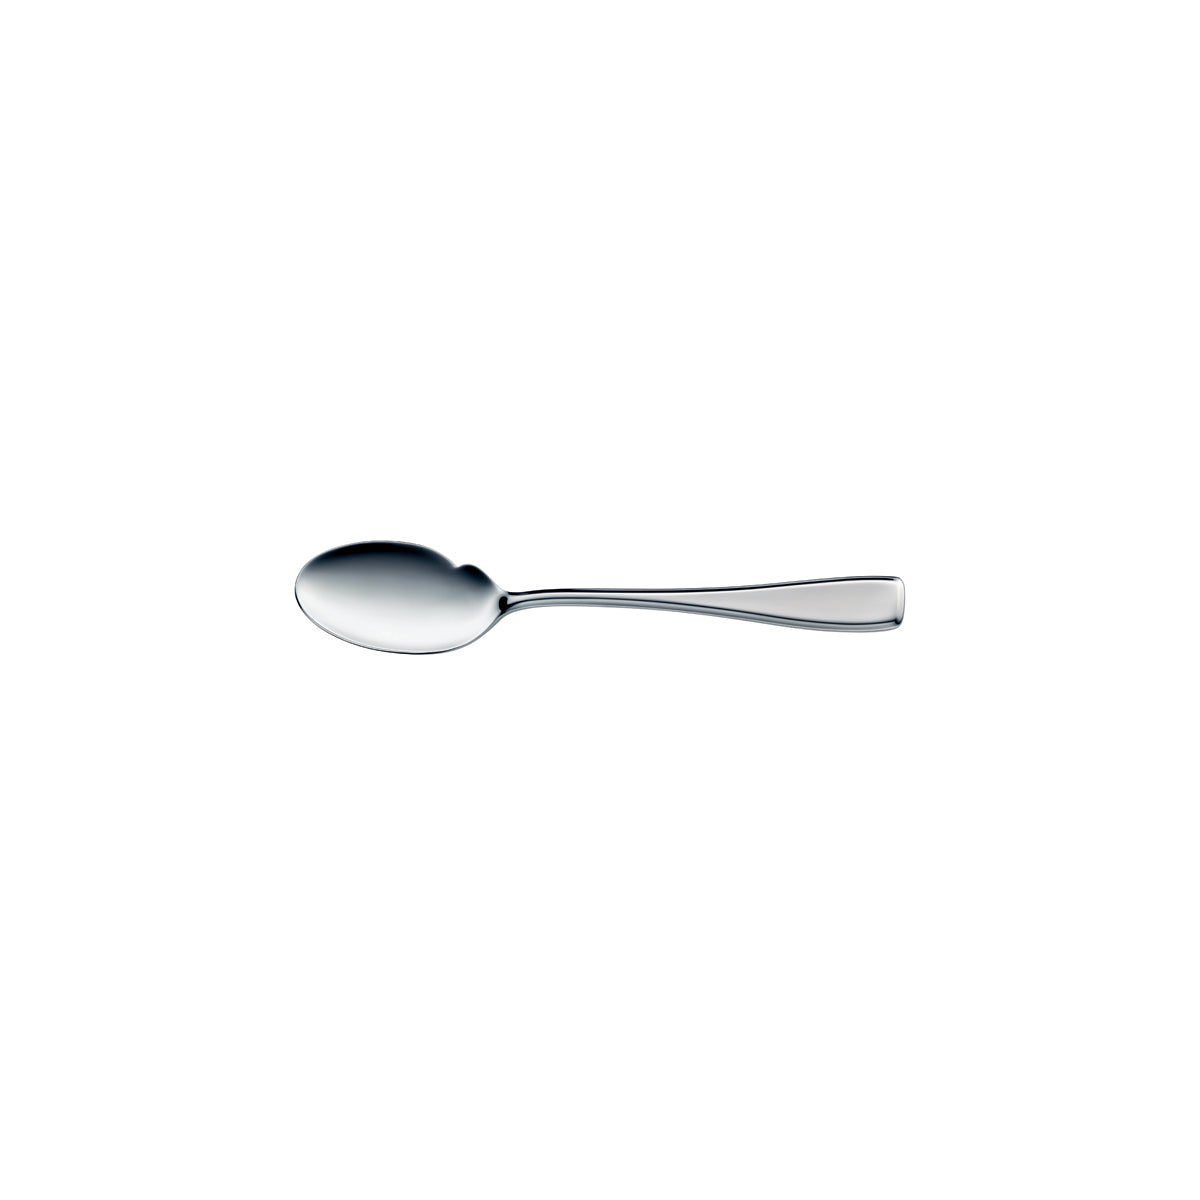 12.7911.6040 WMF Solid Gourmet Spoon Stainless Steel Tomkin Australia Hospitality Supplies